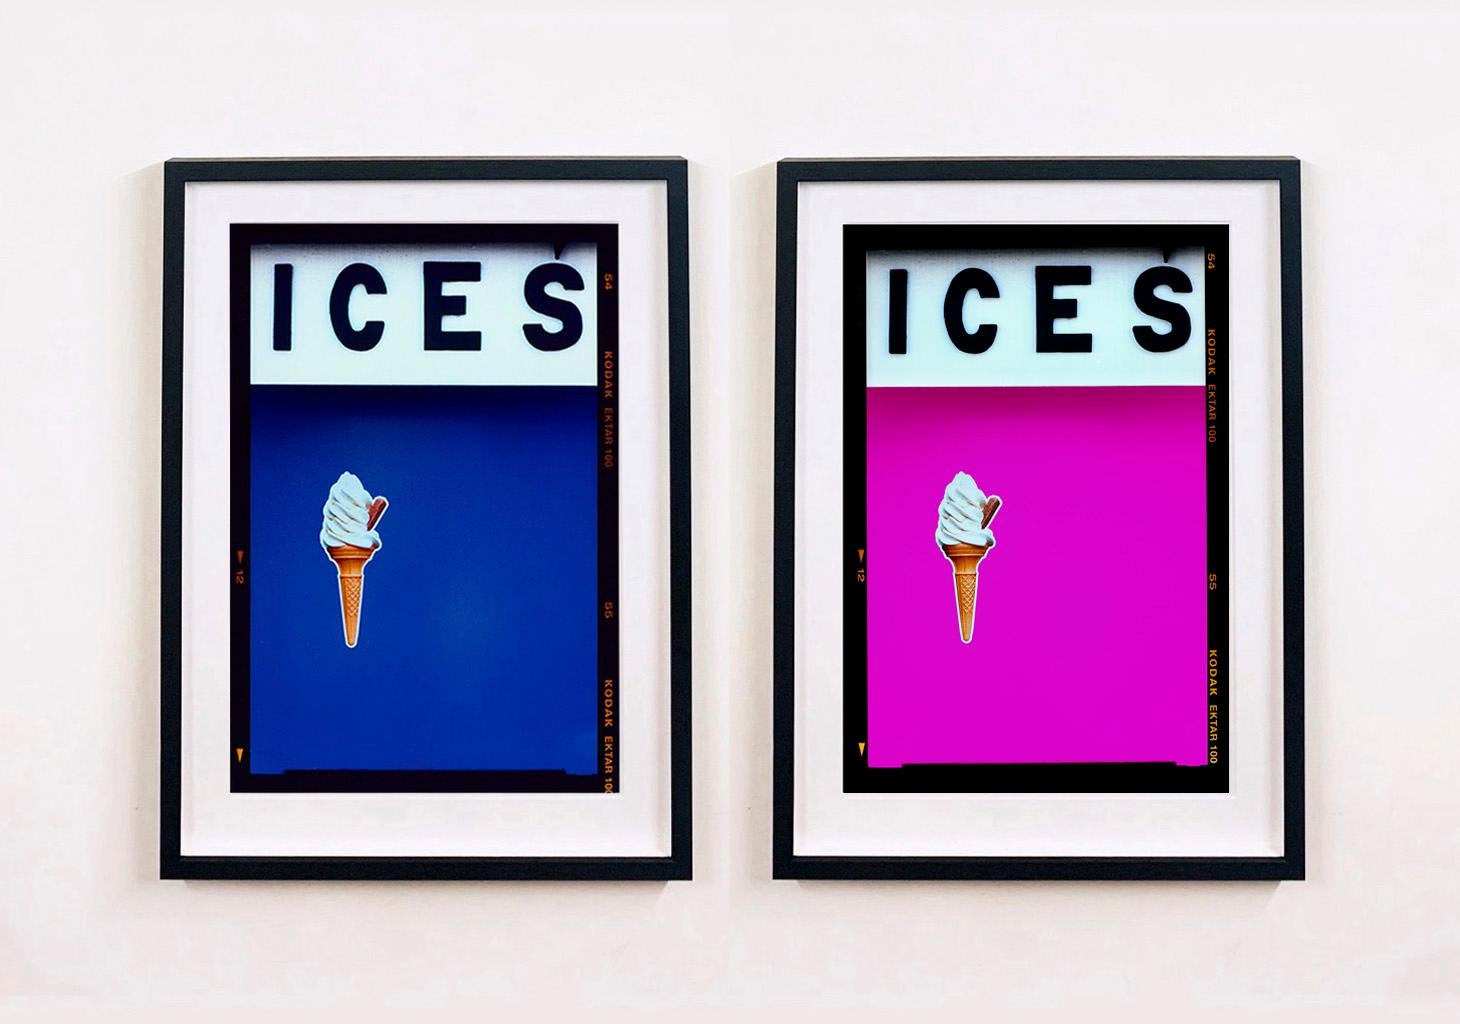 Ices (Pink), Bexhill-on-Sea - British seaside color photography - Contemporary Print by Richard Heeps